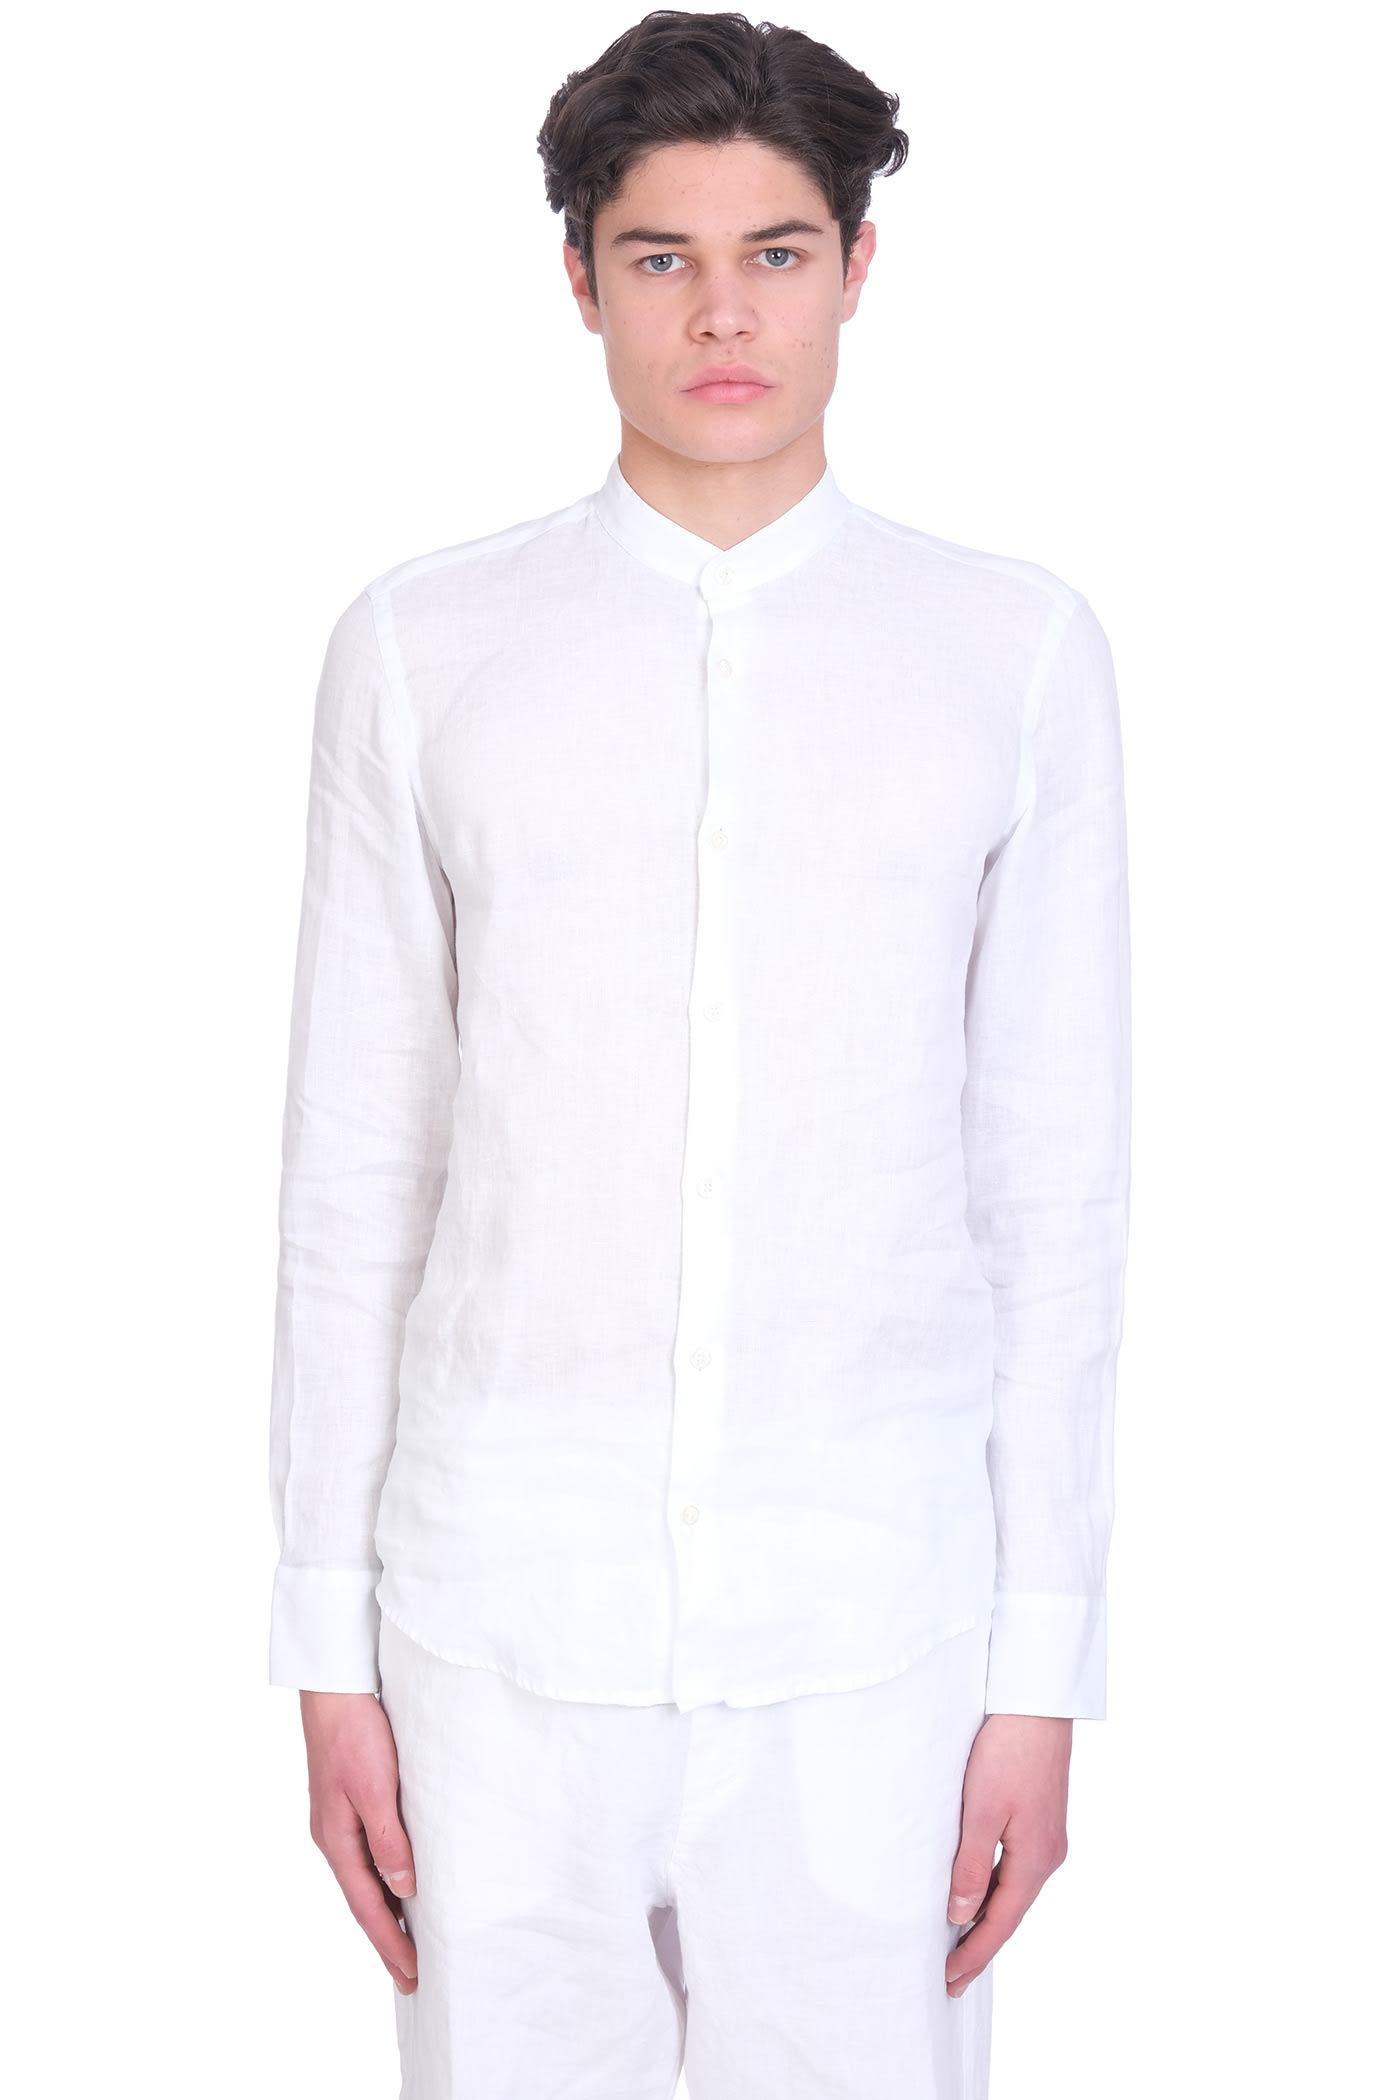 Low Brand Shirt In White Linen